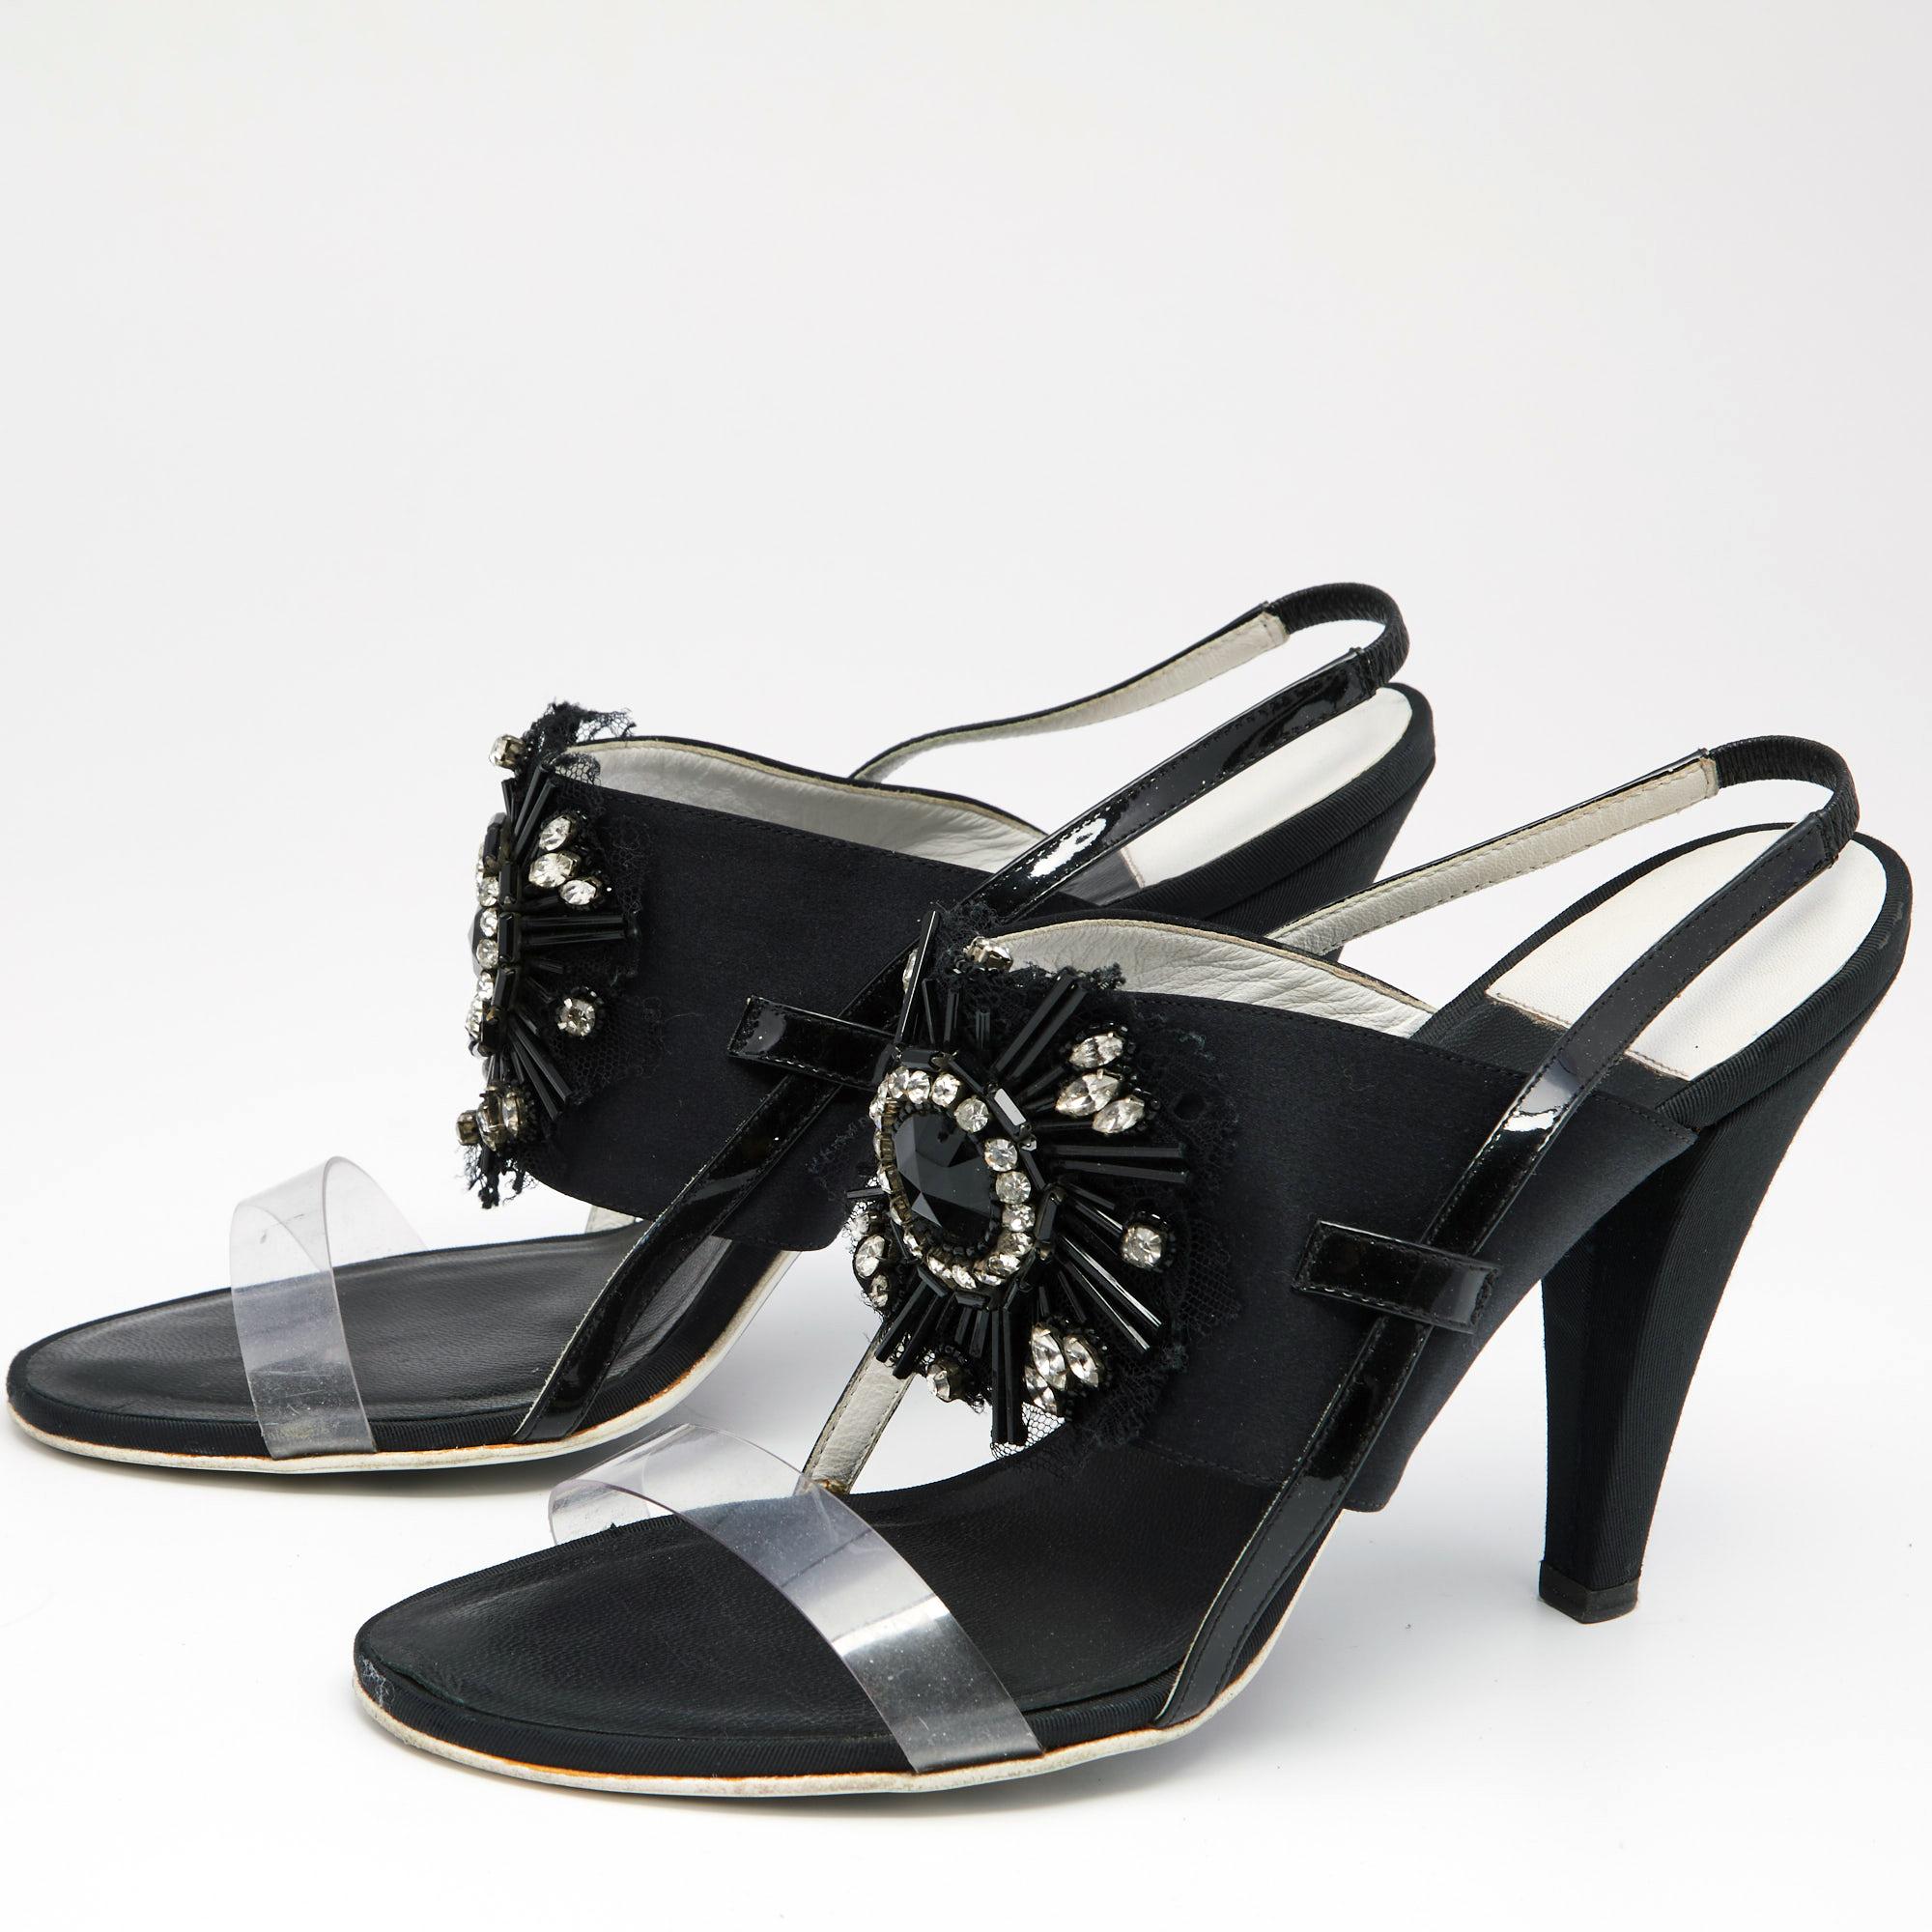 Keep it elegant and chic with these Chanel sandals made from satin and PVC. Styled with embellishments and slingbacks, this pair is complete with 11 cm heels and sturdy soles.

